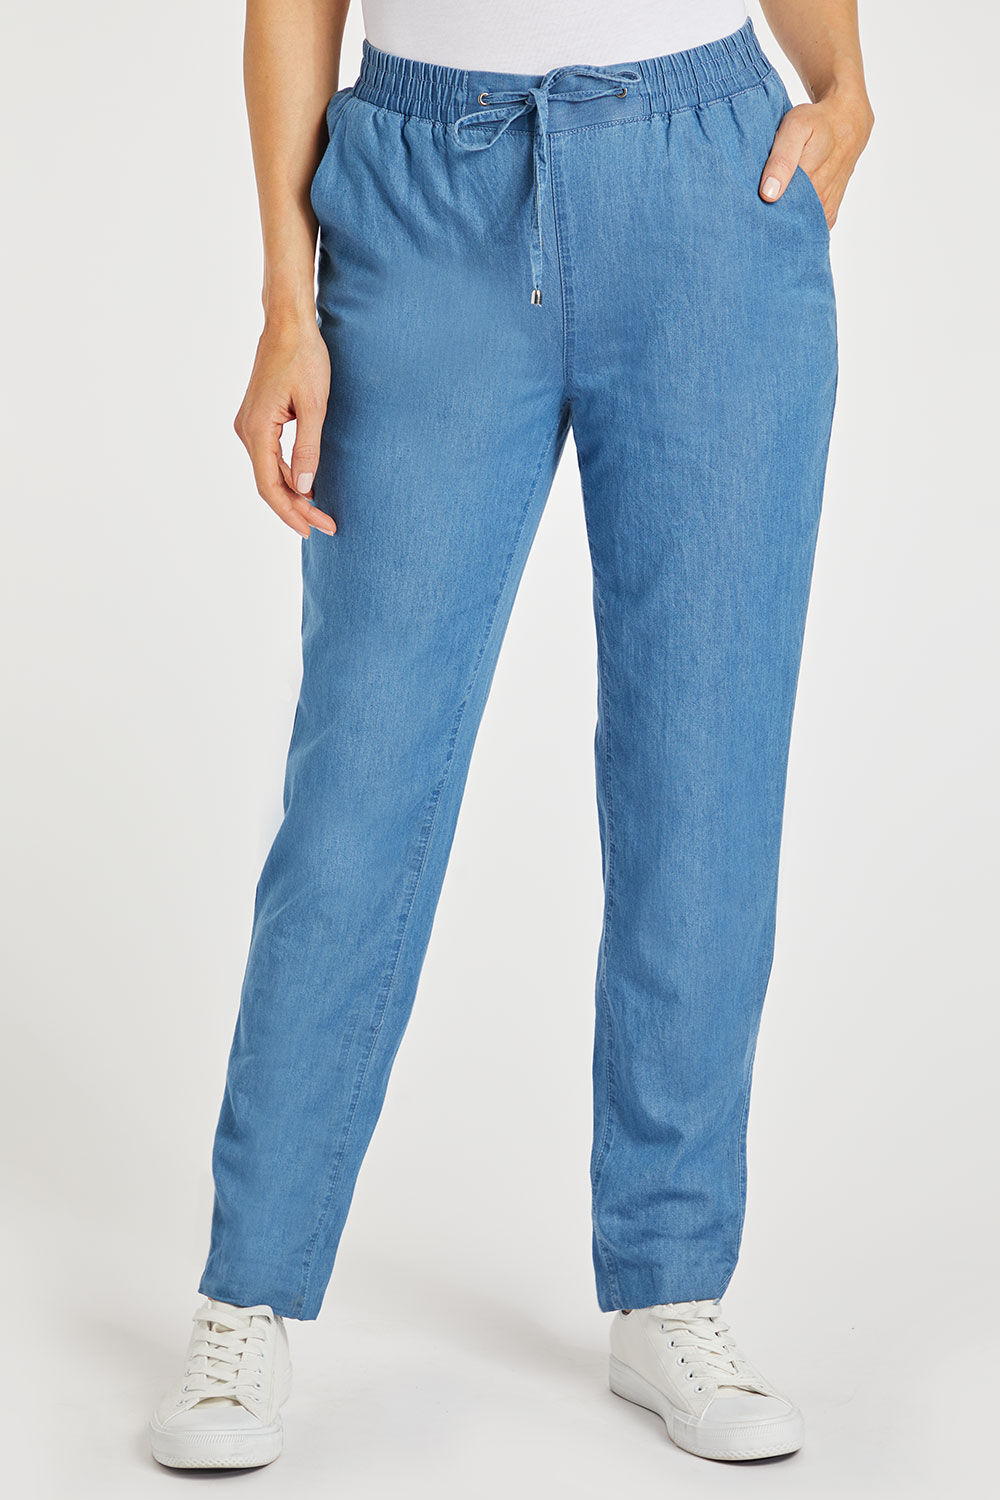 Chambray Fluid Denim Trousers Blue - THE HOUR